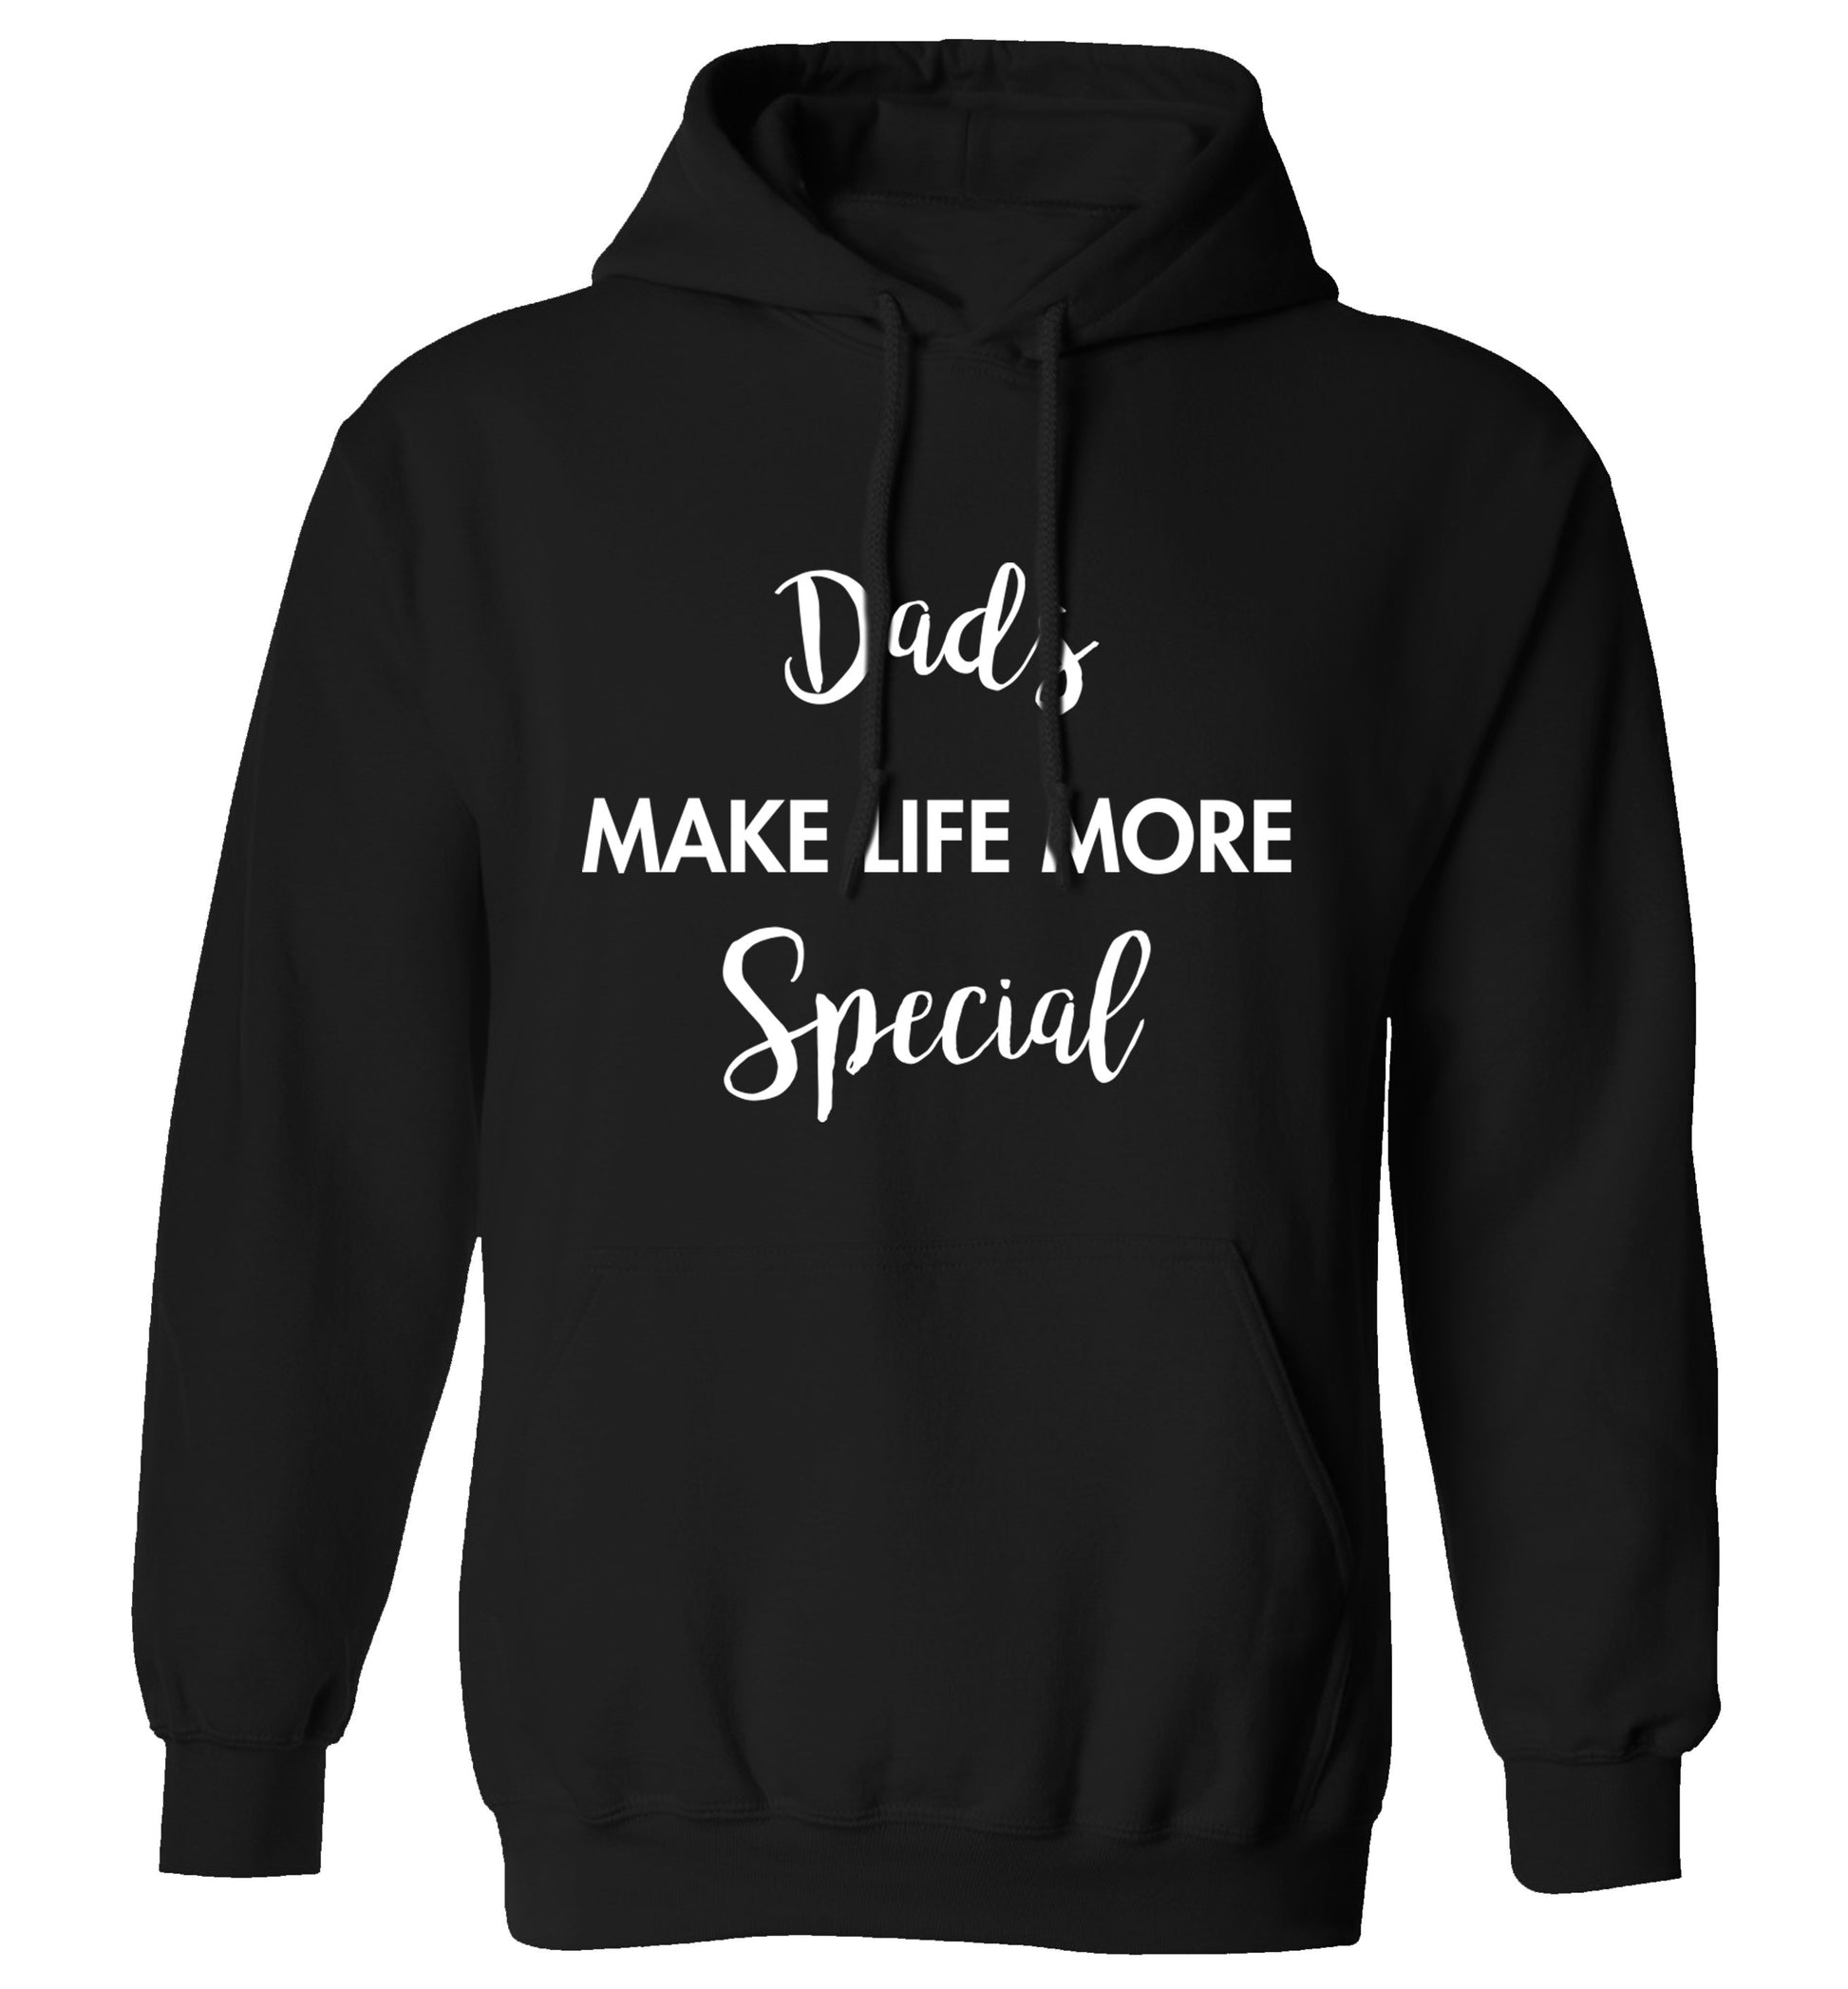 Dads make life more special adults unisex black hoodie 2XL